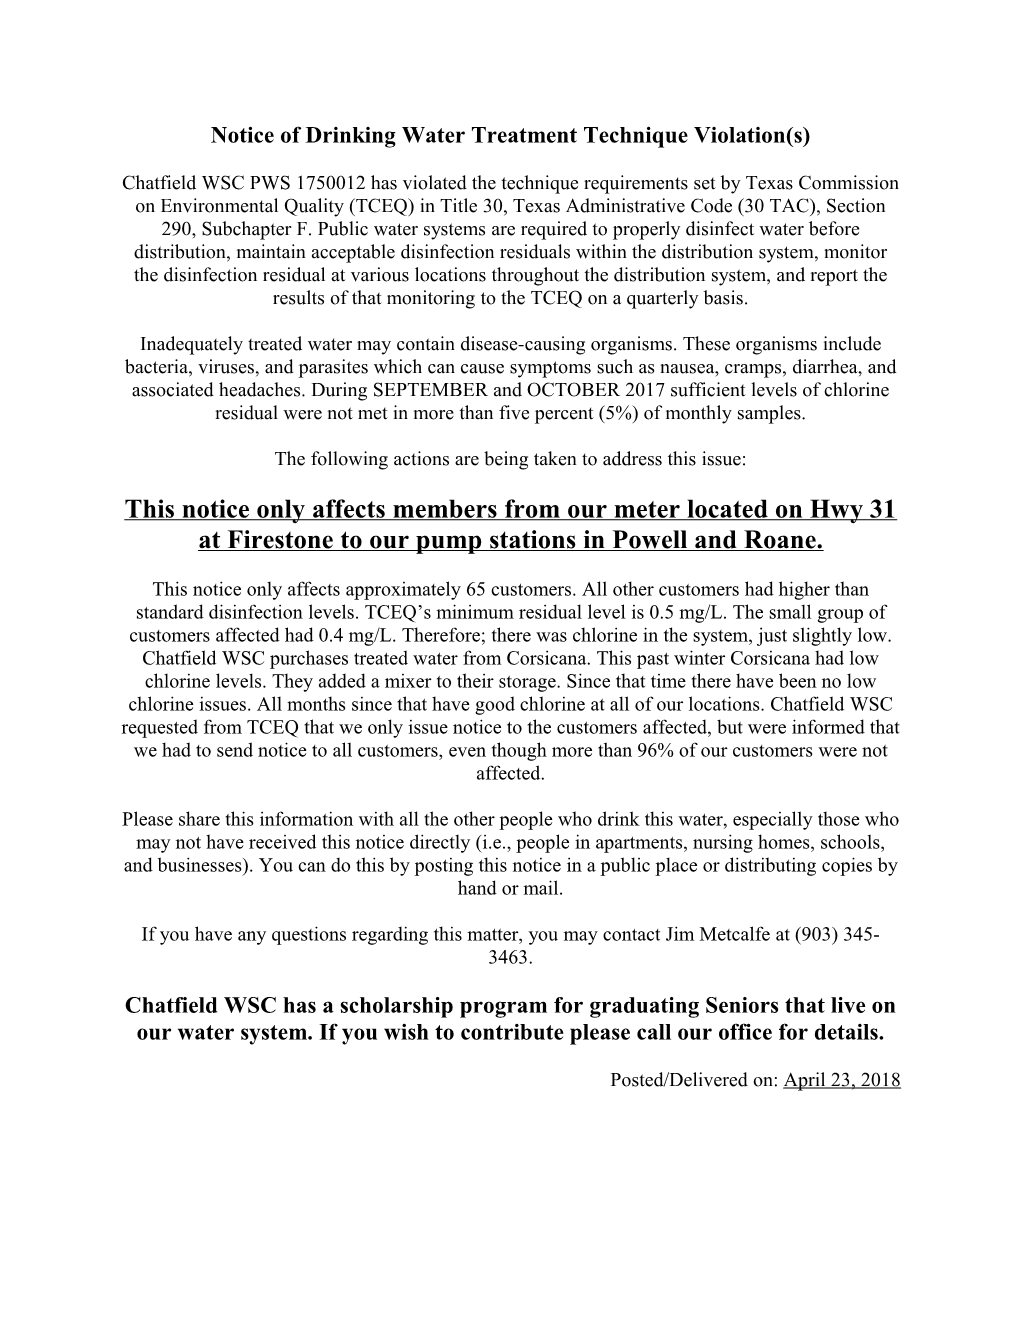 Notice of Drinking Water Treatment Technique Violation(S)